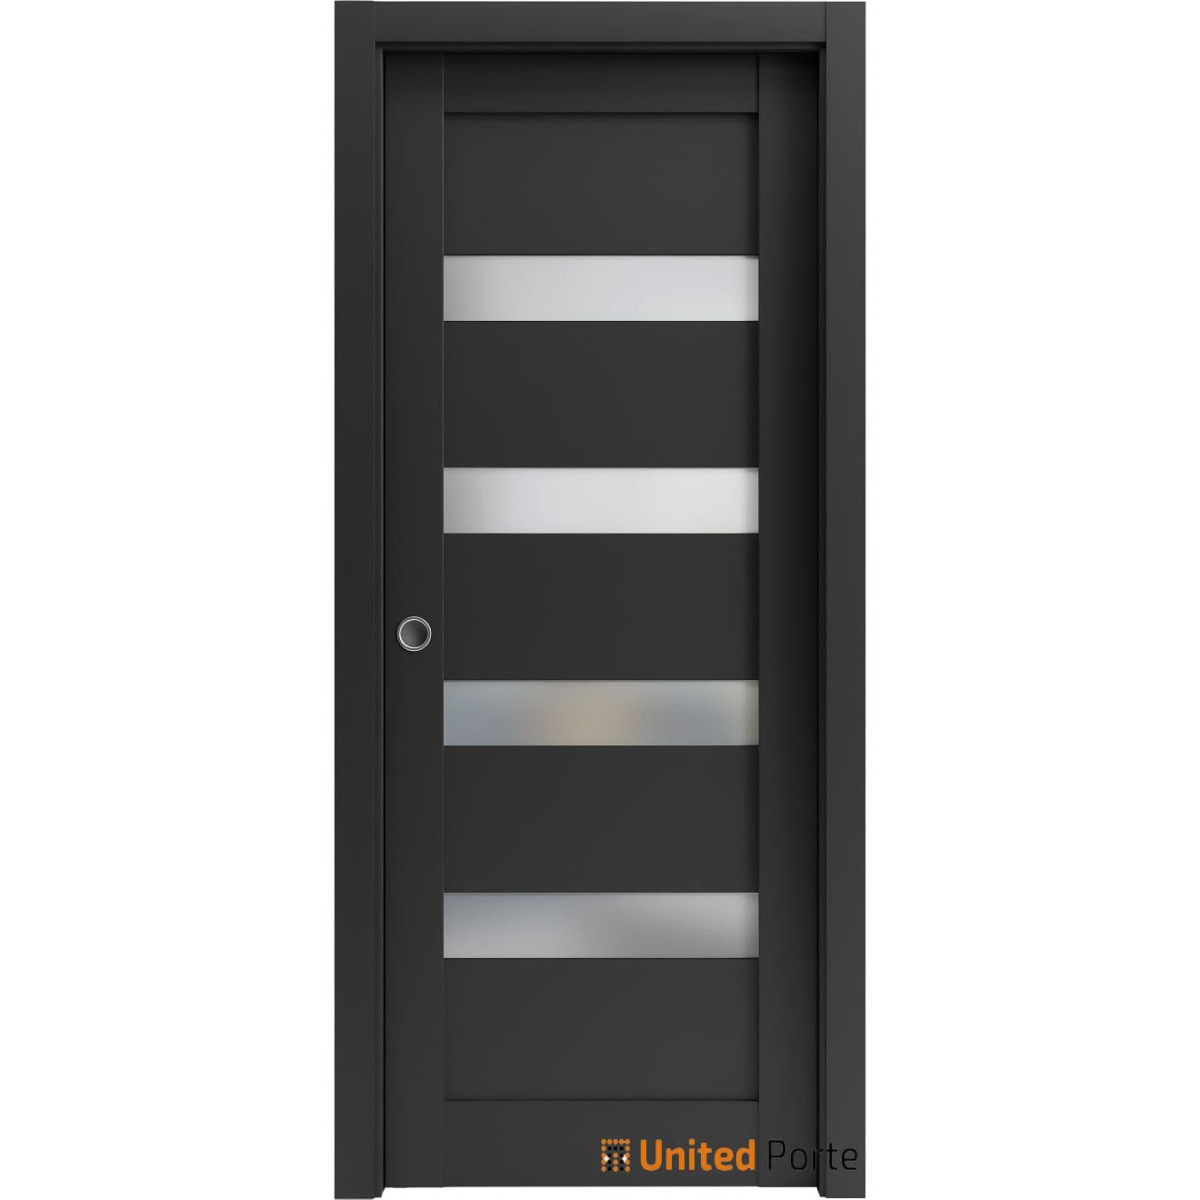 Panel Lite Pocket Door 36 x 80 with Frames | Quadro 4113 Matte Black with Frosted Opaque Glass | Kit Trims Rail Hardware | Solid Wood Interior Pantry Kitchen Bedroom Sliding Closet Sturdy Doors